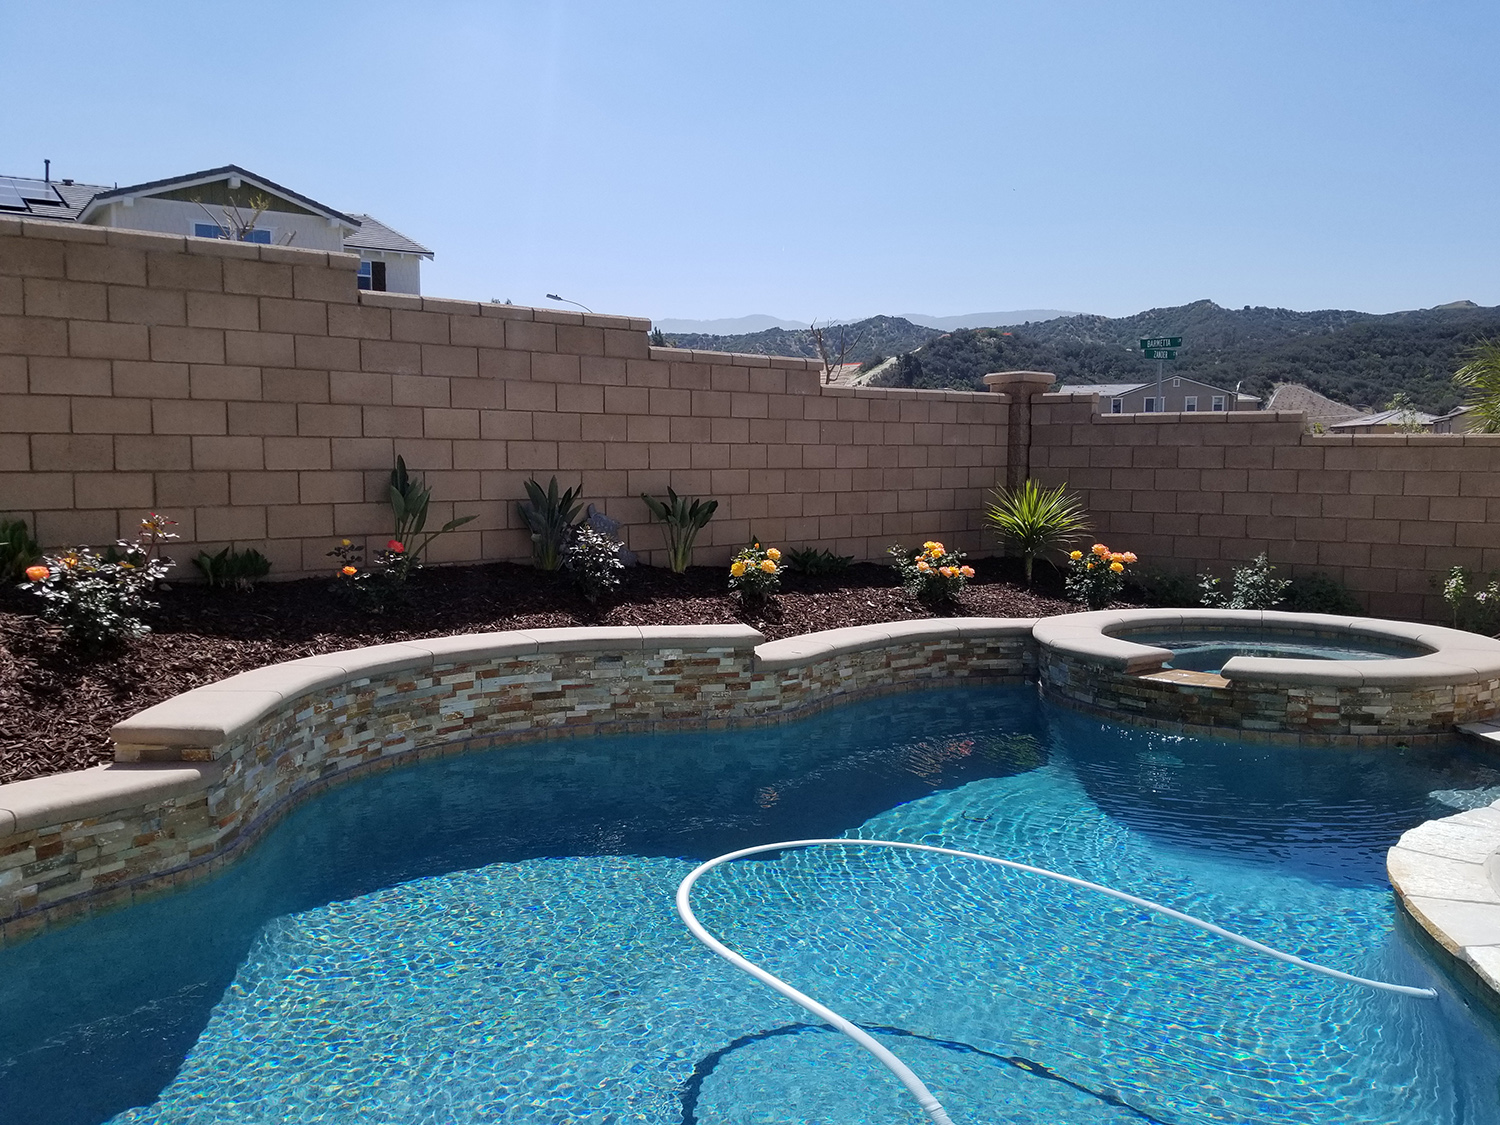 Pool with raised wall, stonework and plantings